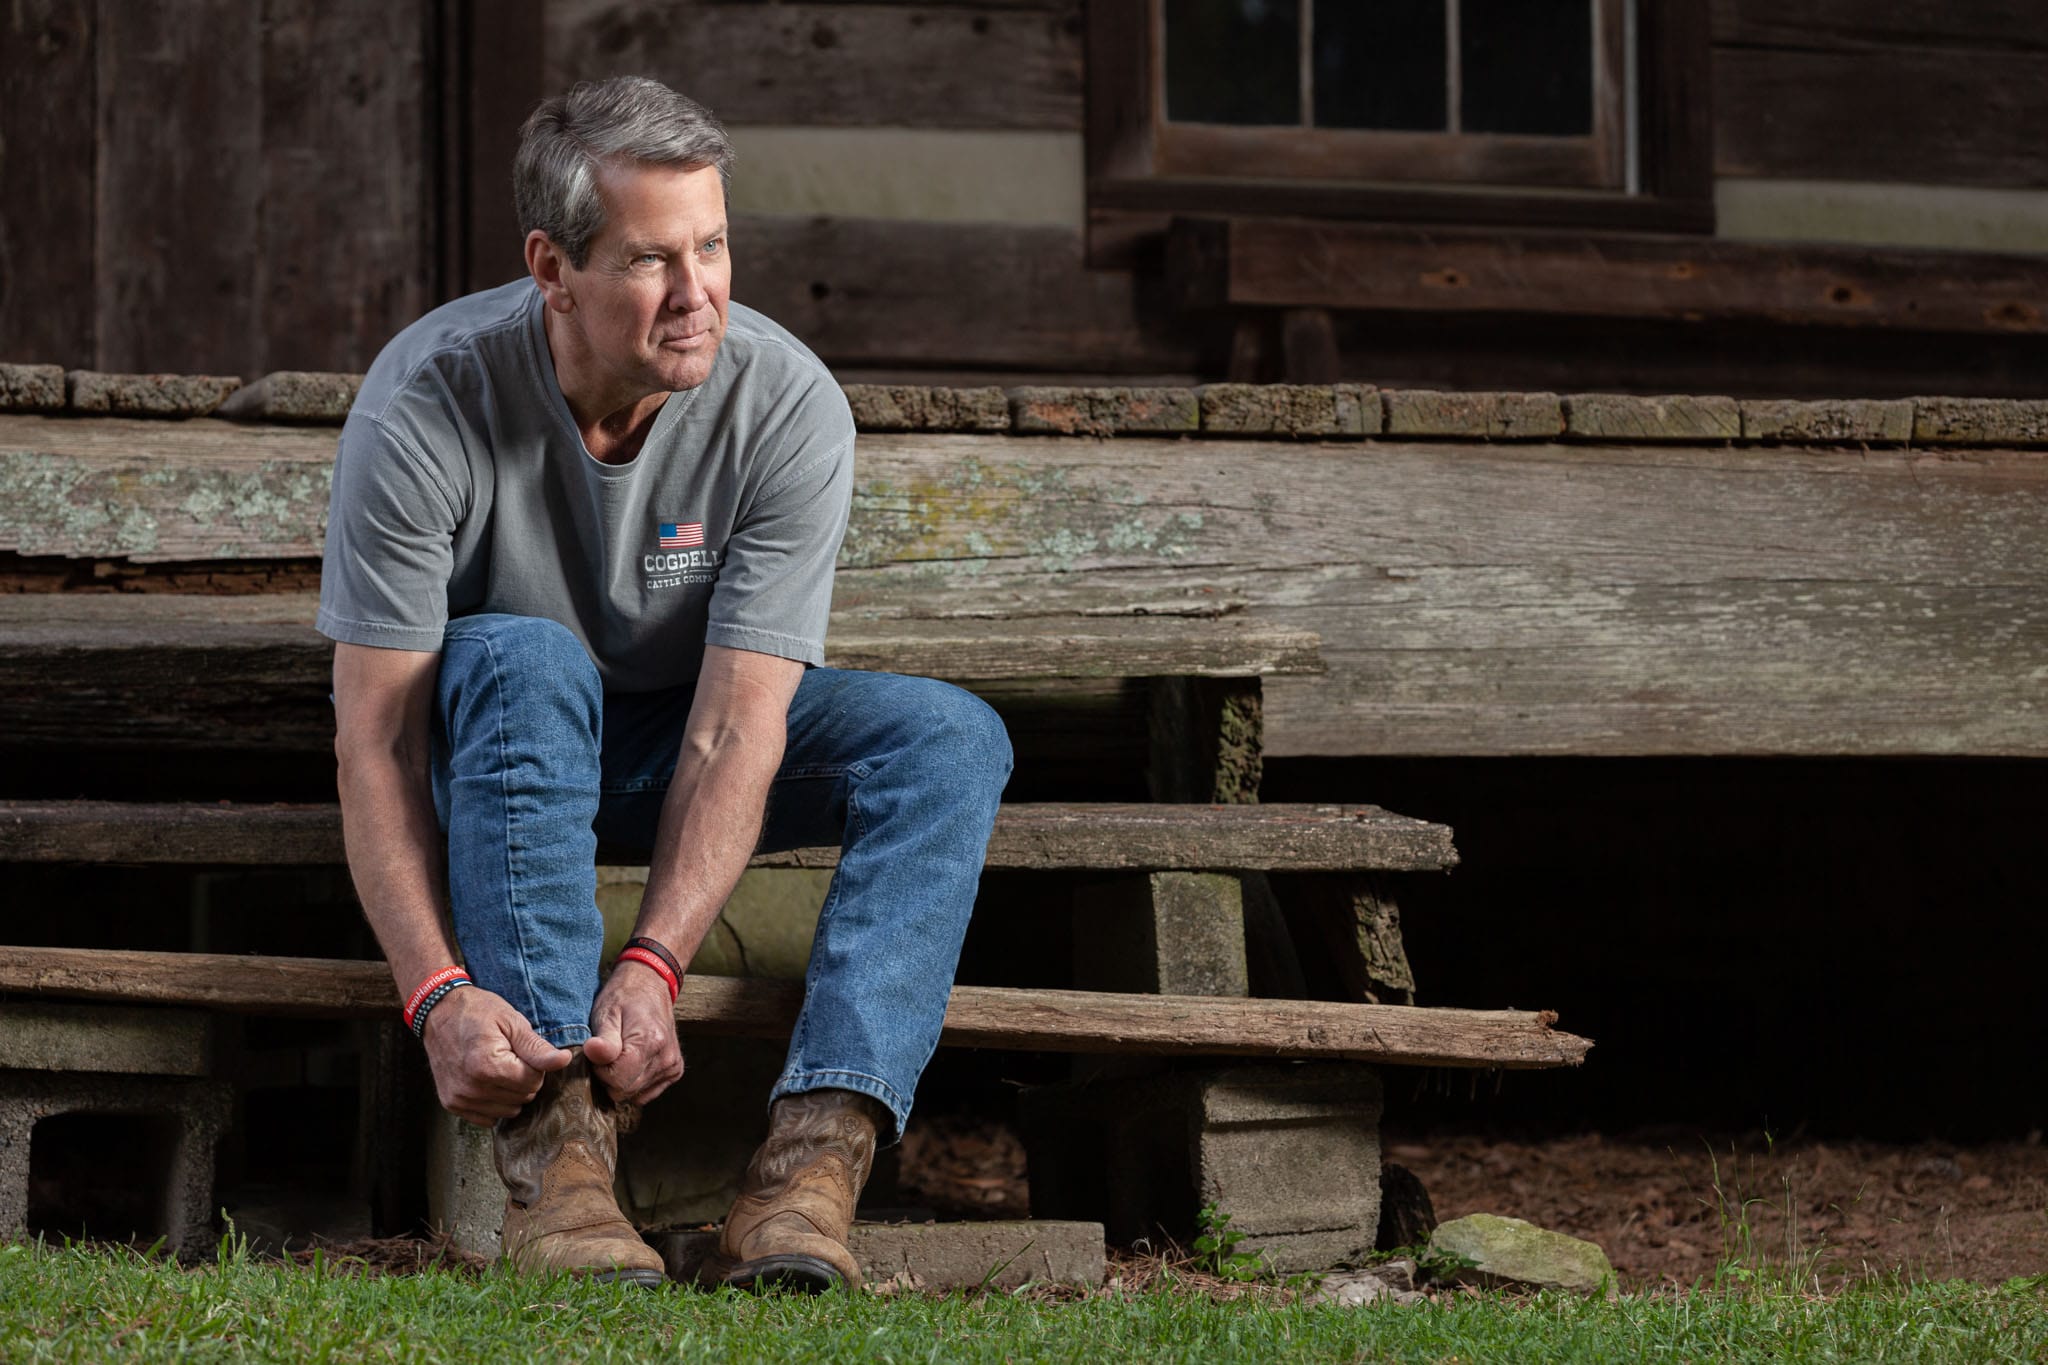 Georgia Governor Brian Kemp putting on his boots on the steps of his family's historical log cabin in Athens, Georgia.